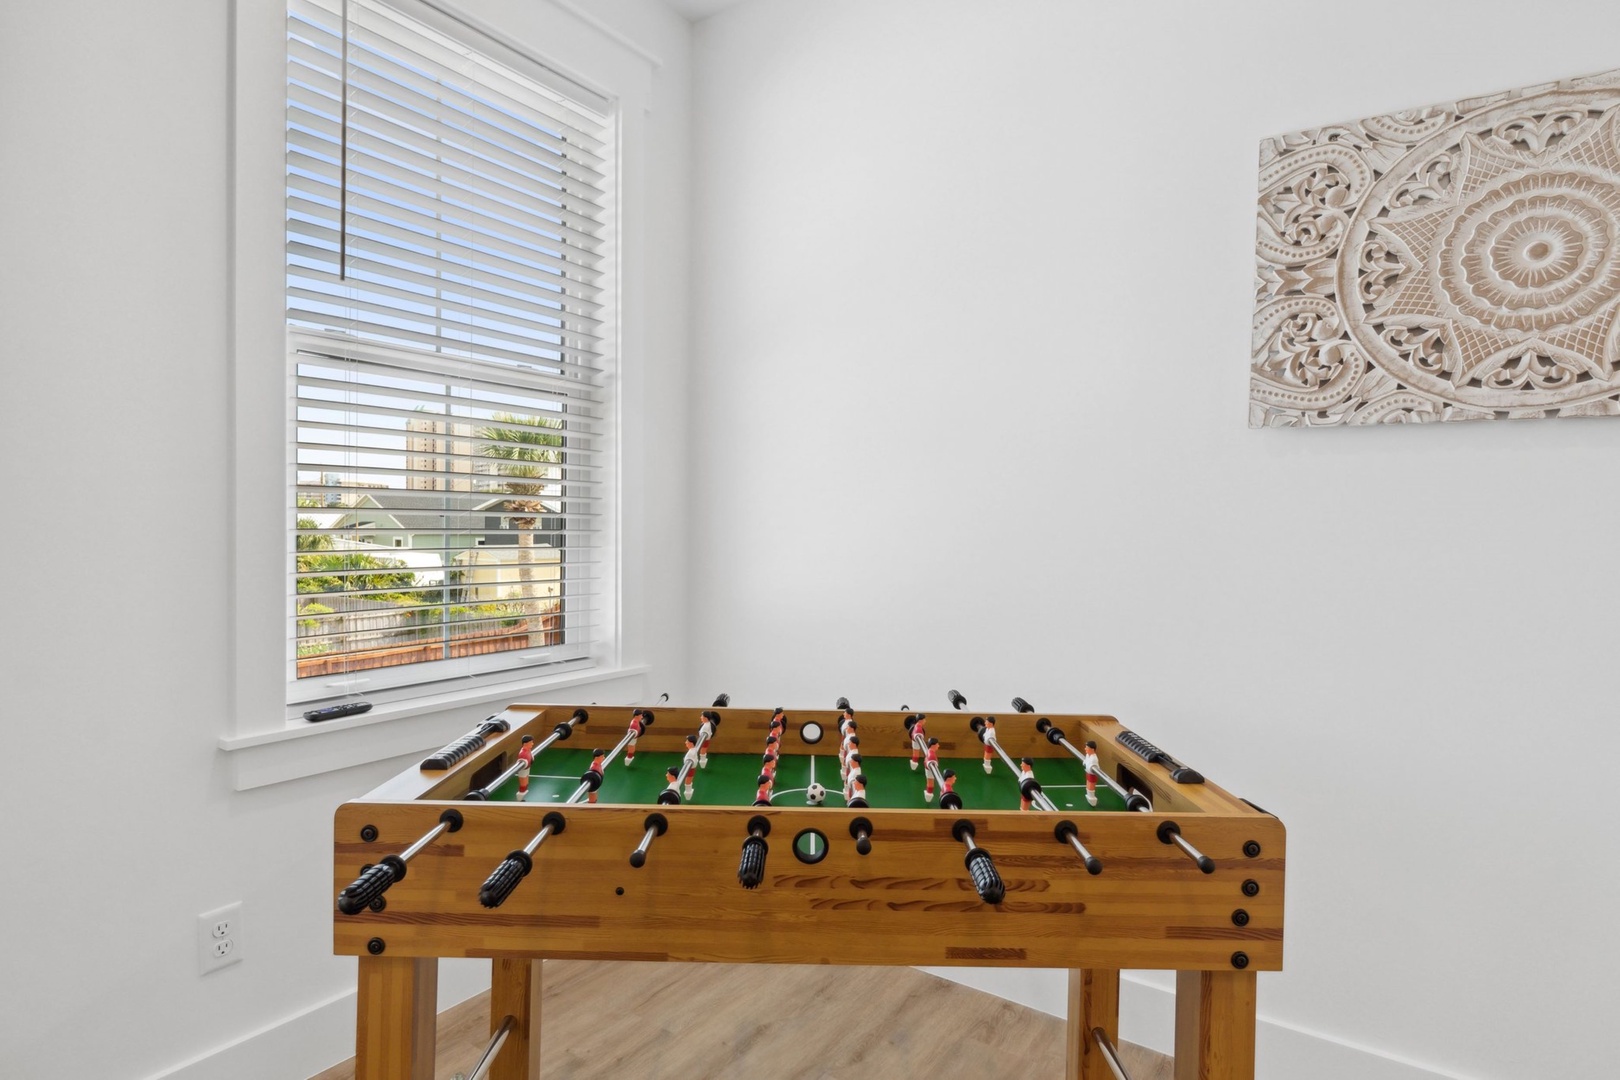 Delight in a spirited game of foosball.